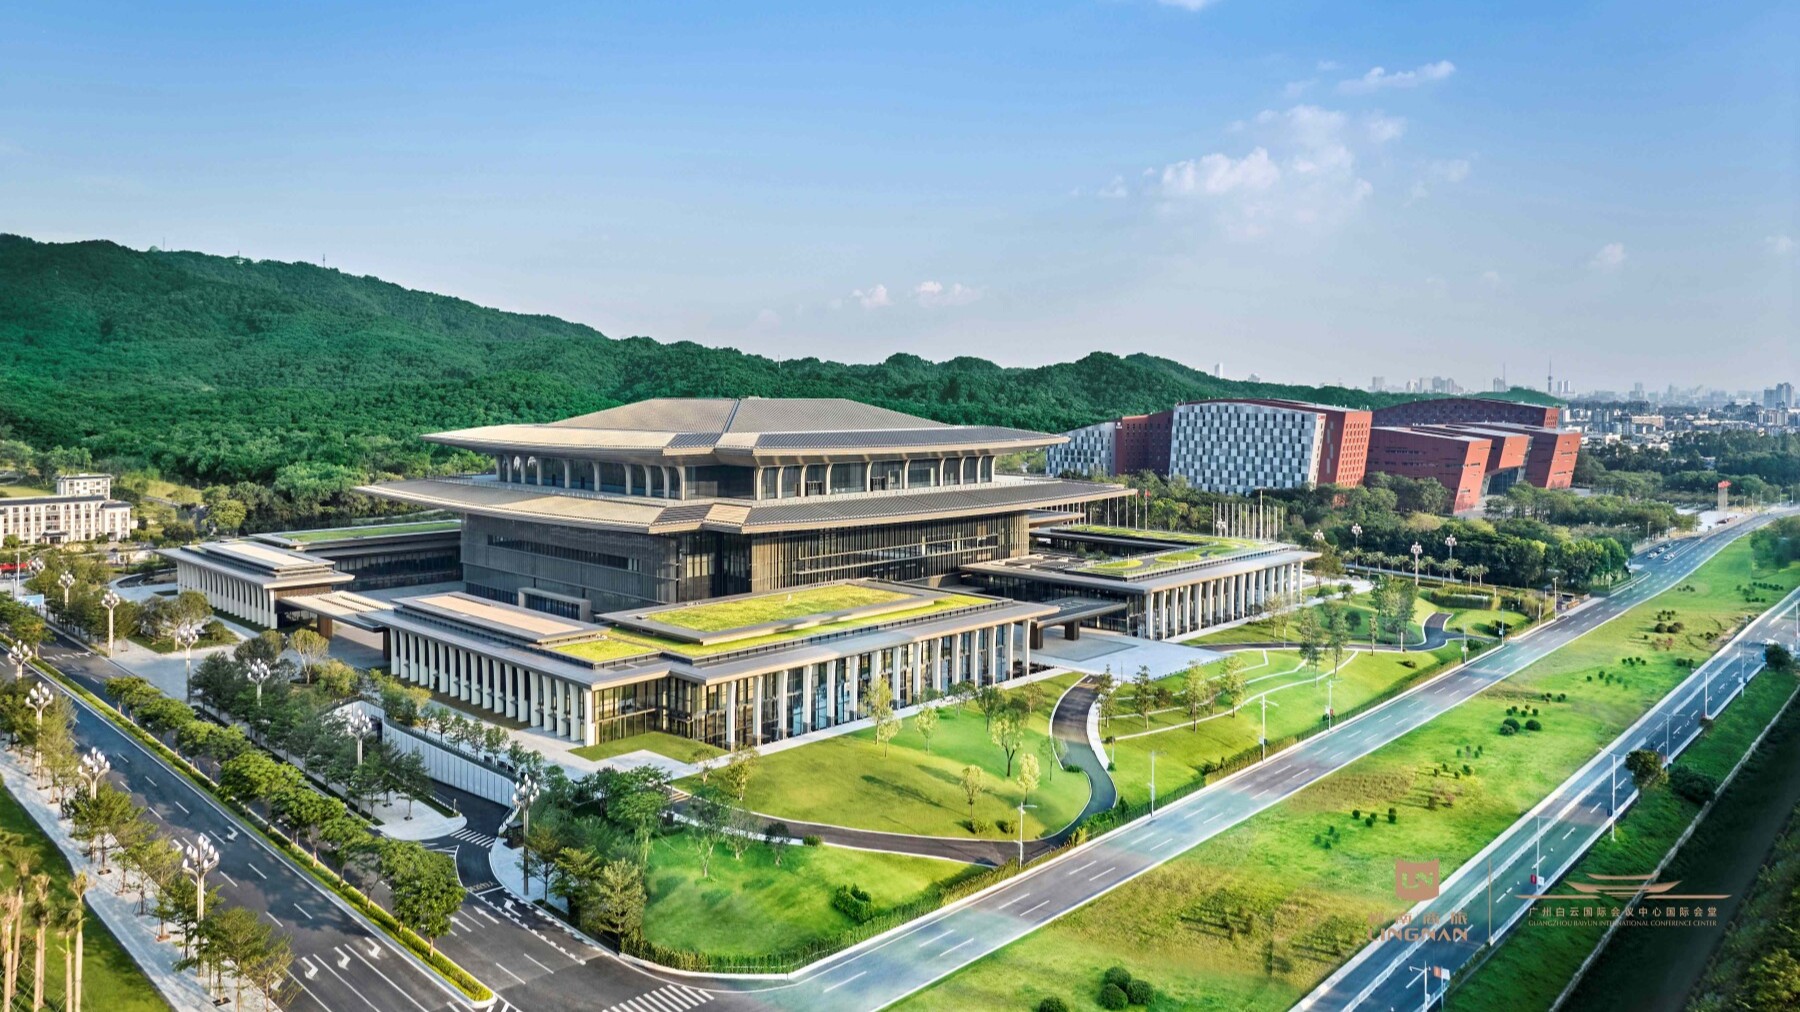 New event site option in Guangzhou: Baiyun international conference center